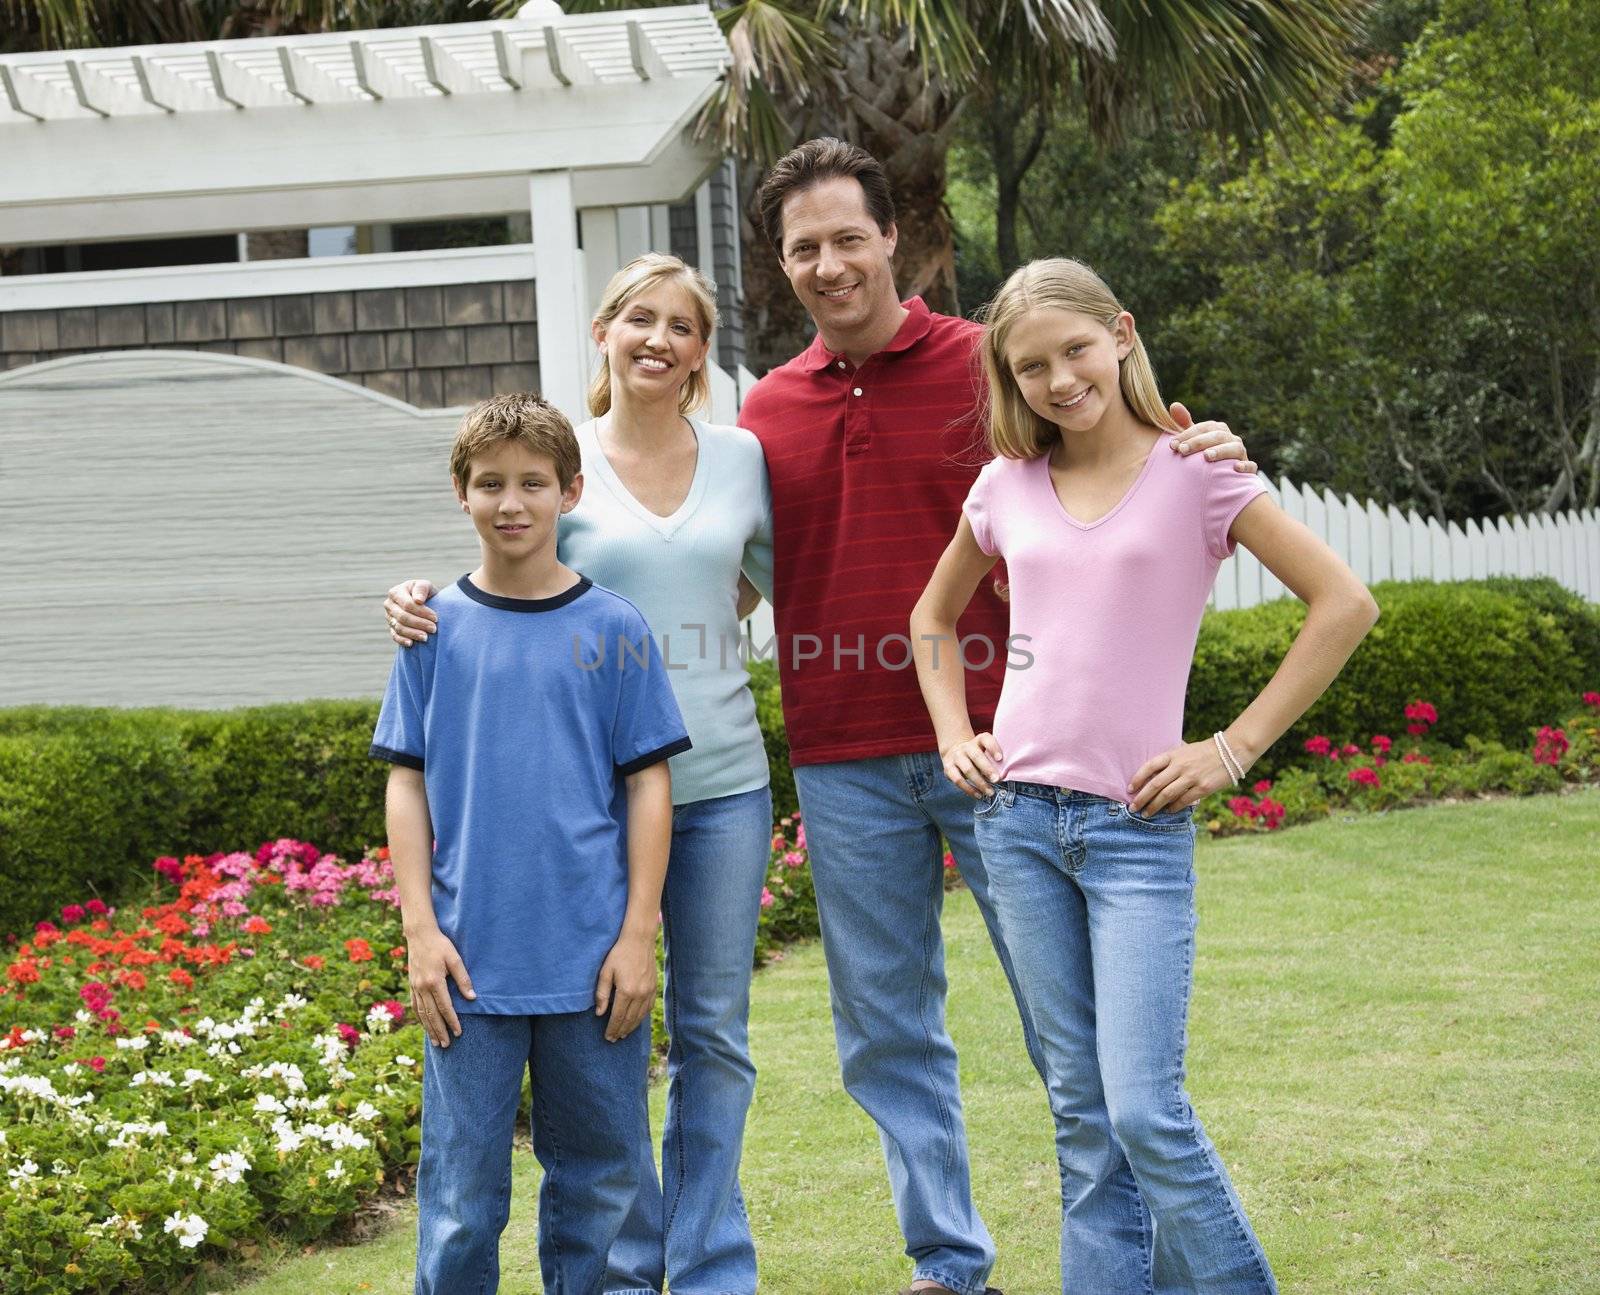 Caucasian family of four posing for portrait in yard.